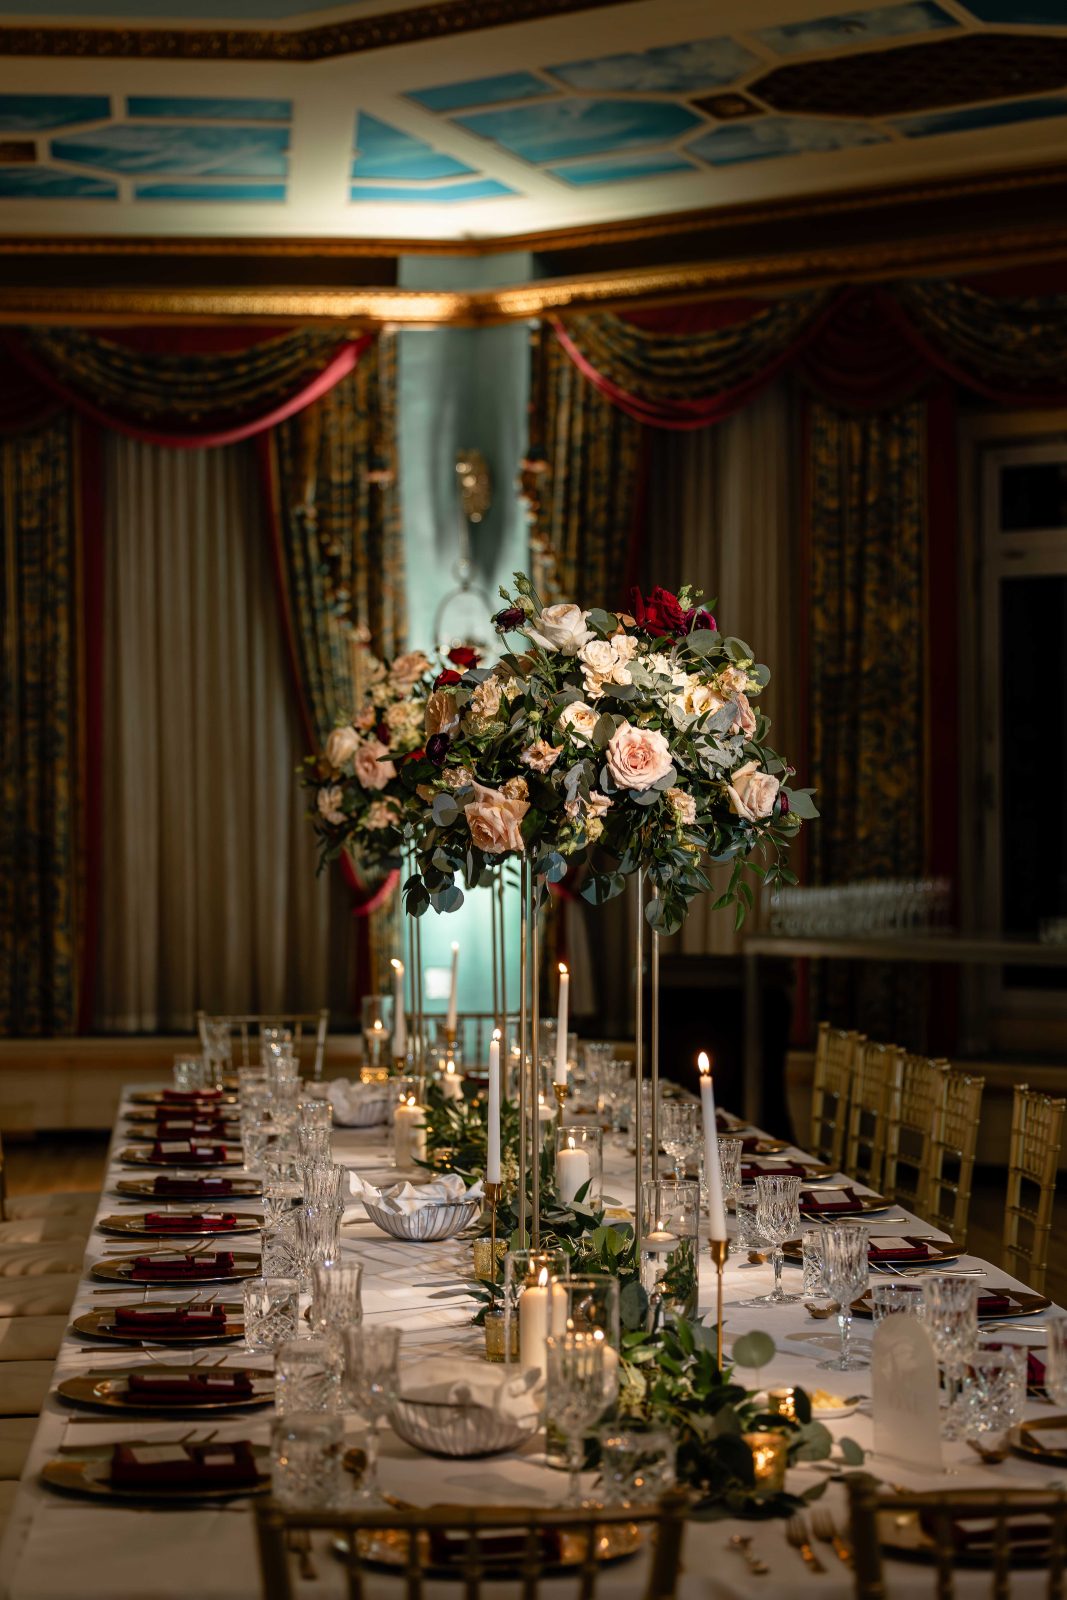 Elegant tall centrepieces featuring burgundy, blush and ivory blooms for a classic romantic look